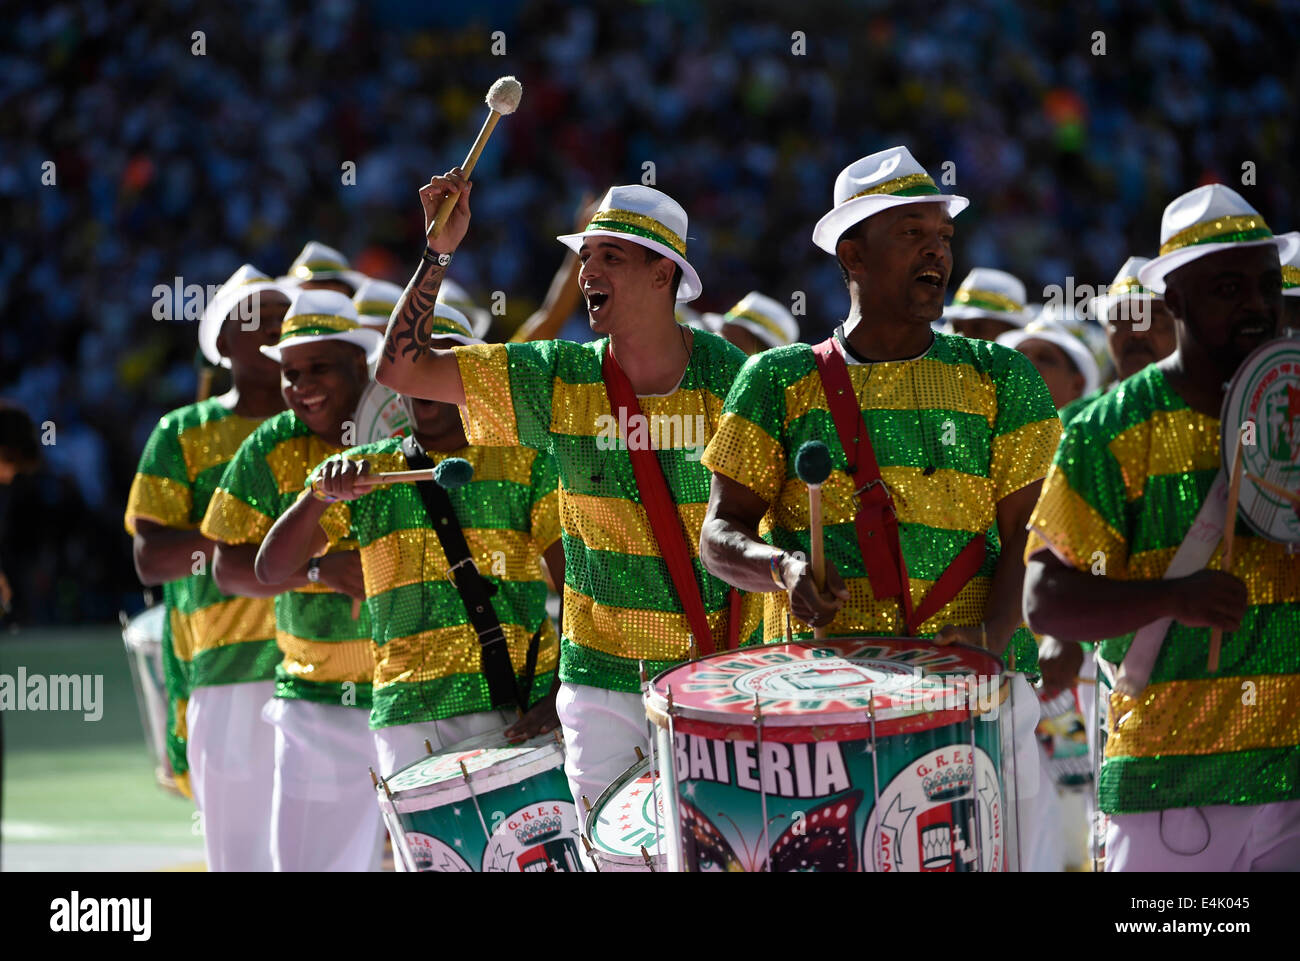 Rio De Janeiro, Brazil. 13th July, 2014. Drumers perform during the closing ceremony before the final match between Germany and Argentina of 2014 FIFA World Cup at the Estadio do Maracana Stadium in Rio de Janeiro, Brazil, on July 13, 2014. Credit:  Yang Lei/Xinhua/Alamy Live News Stock Photo